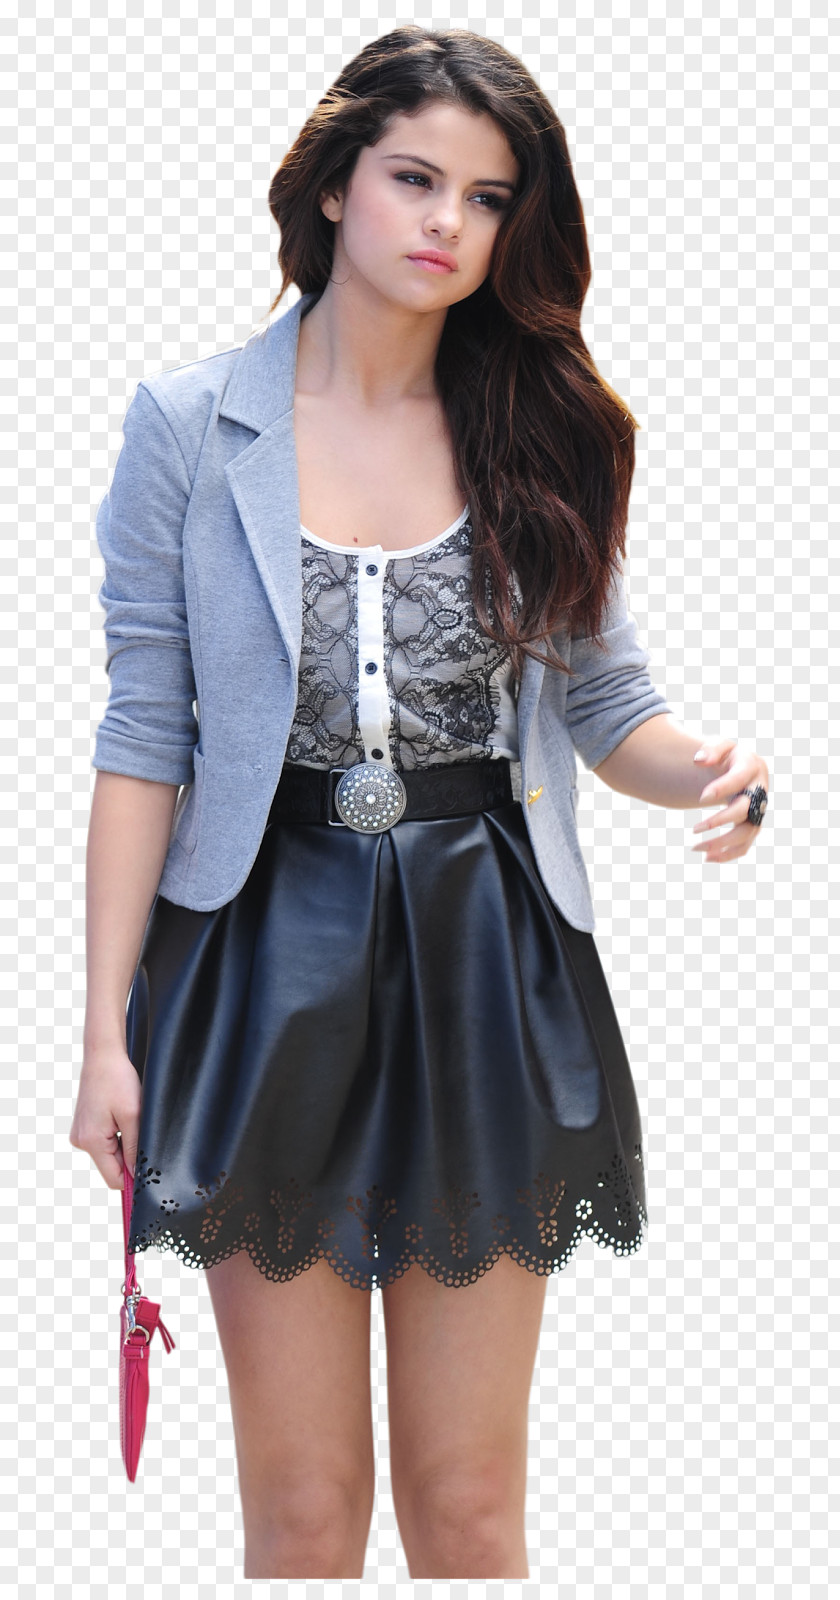 Rita Ora Dream Out Loud By Selena Gomez Black And White PNG